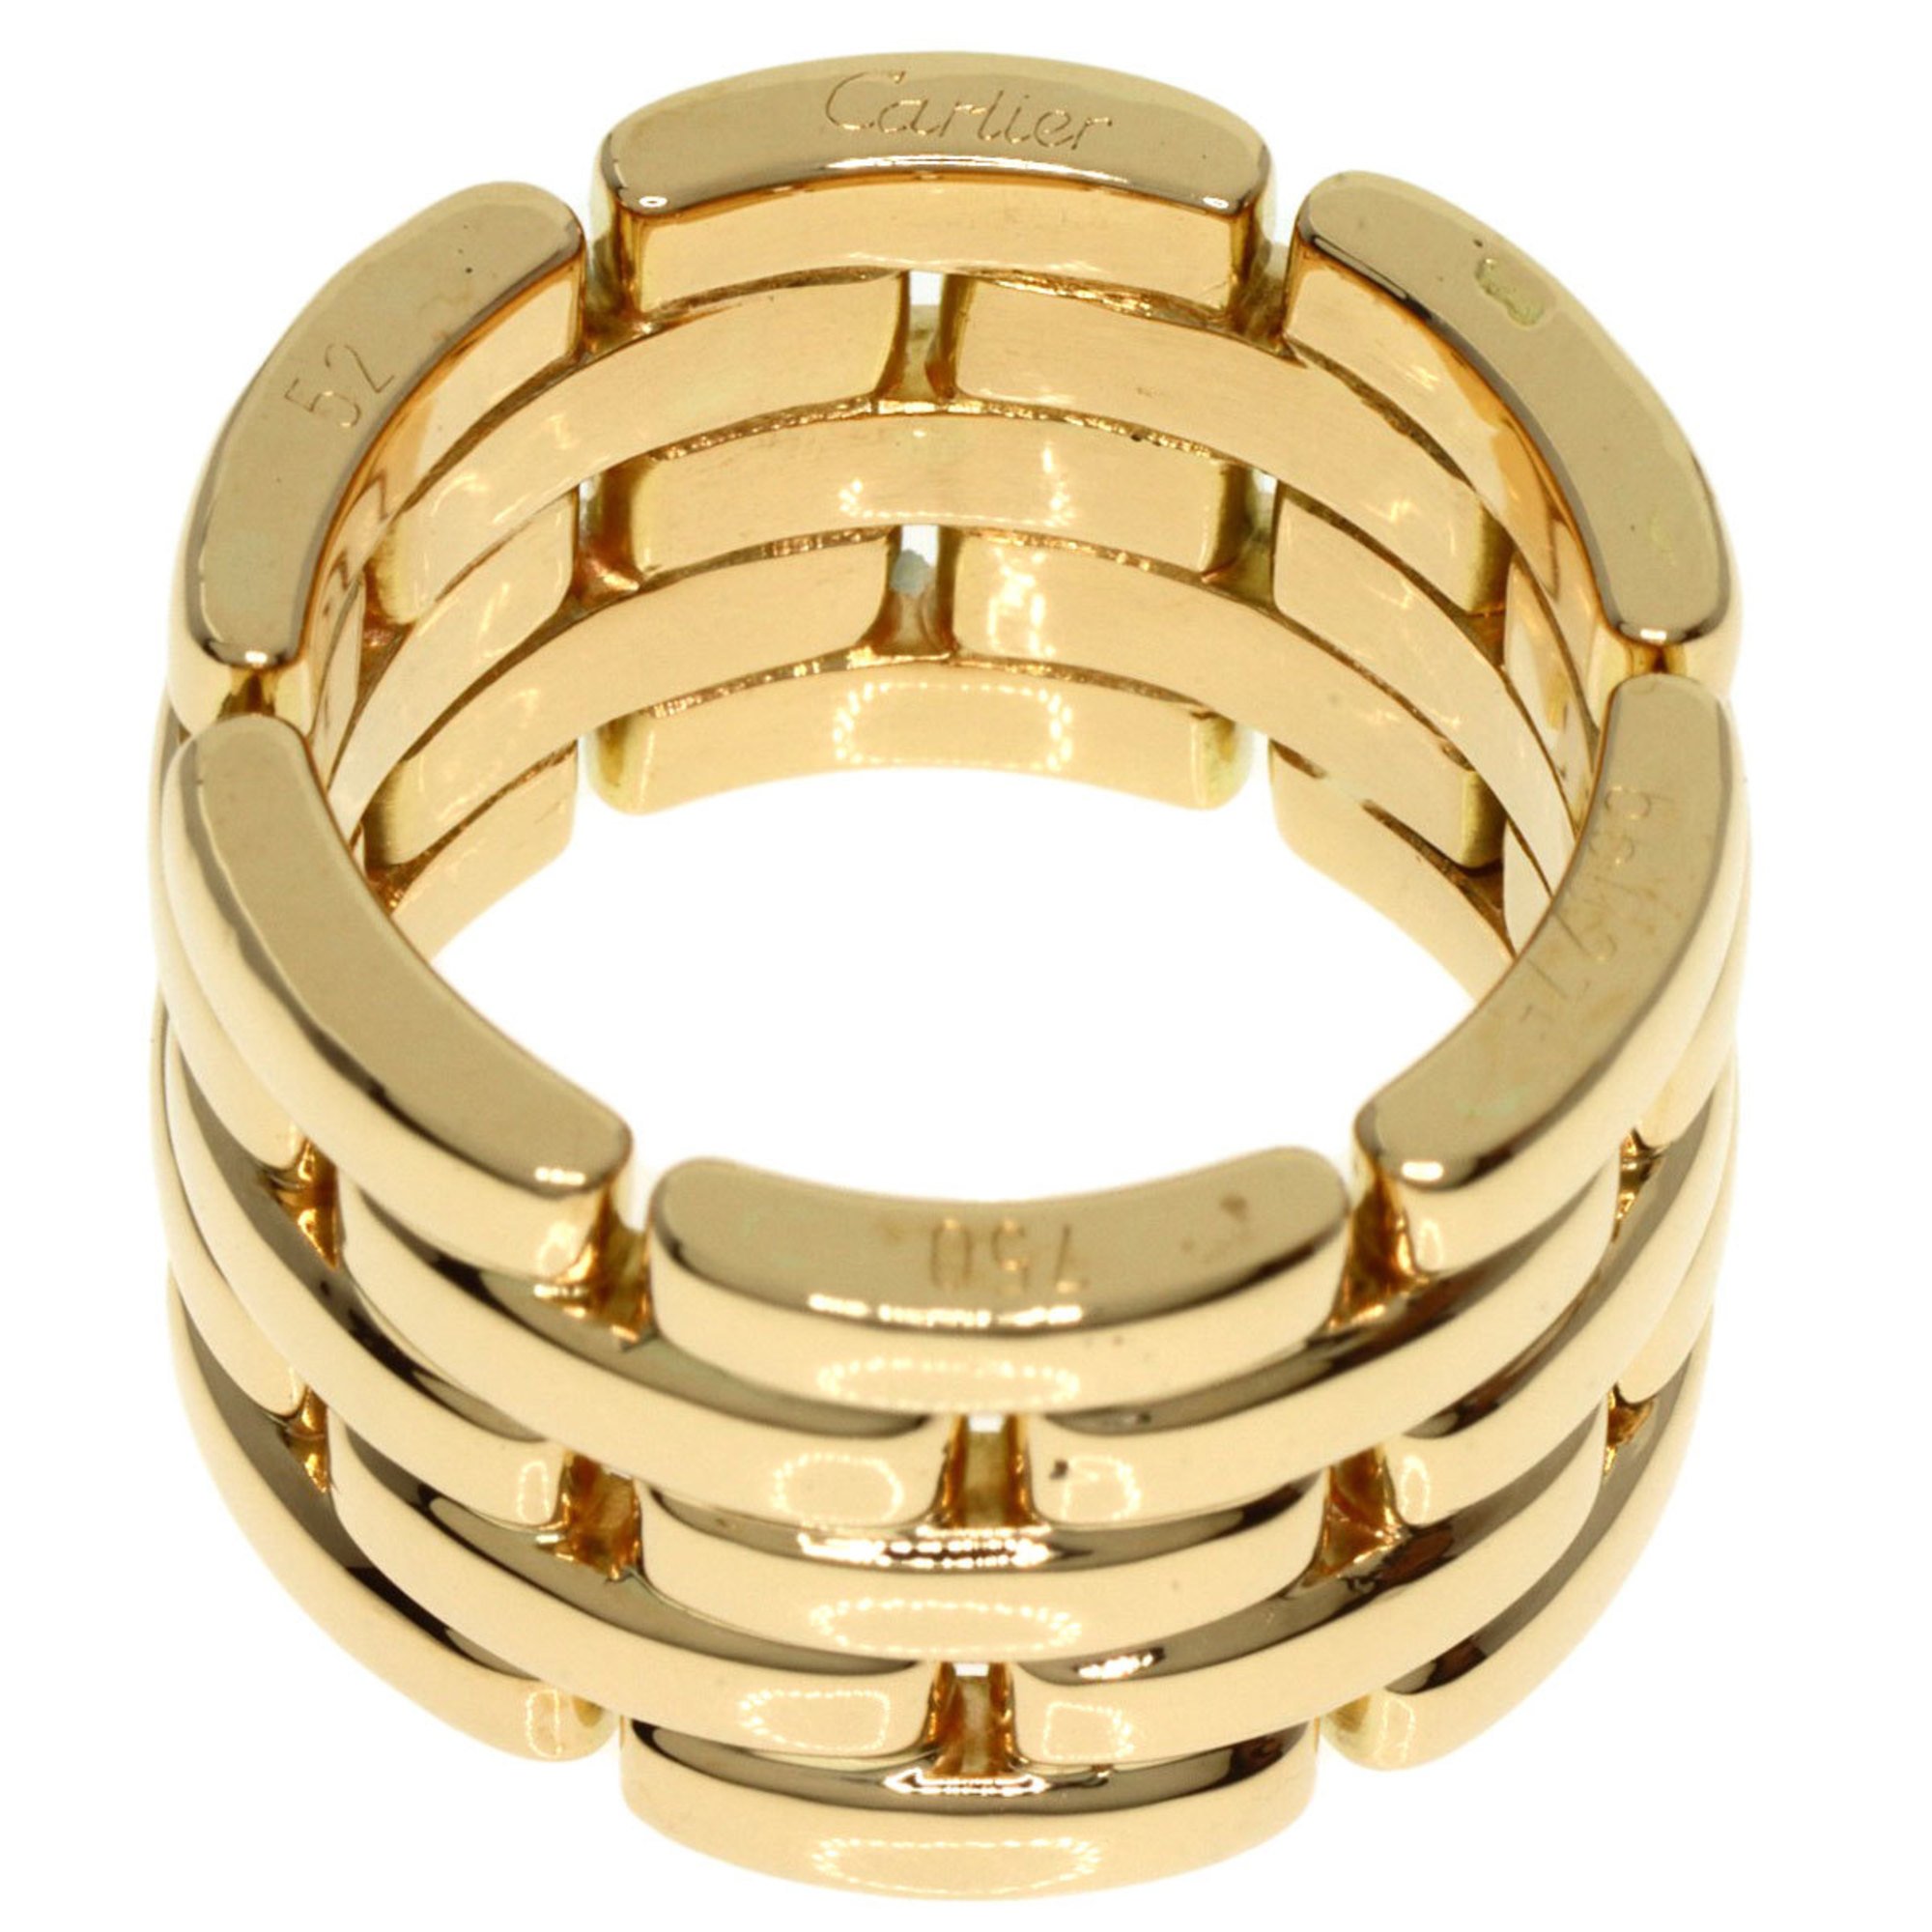 Cartier Maillon Panthere #52 Ring, 18K Yellow Gold, Women's, CARTIER